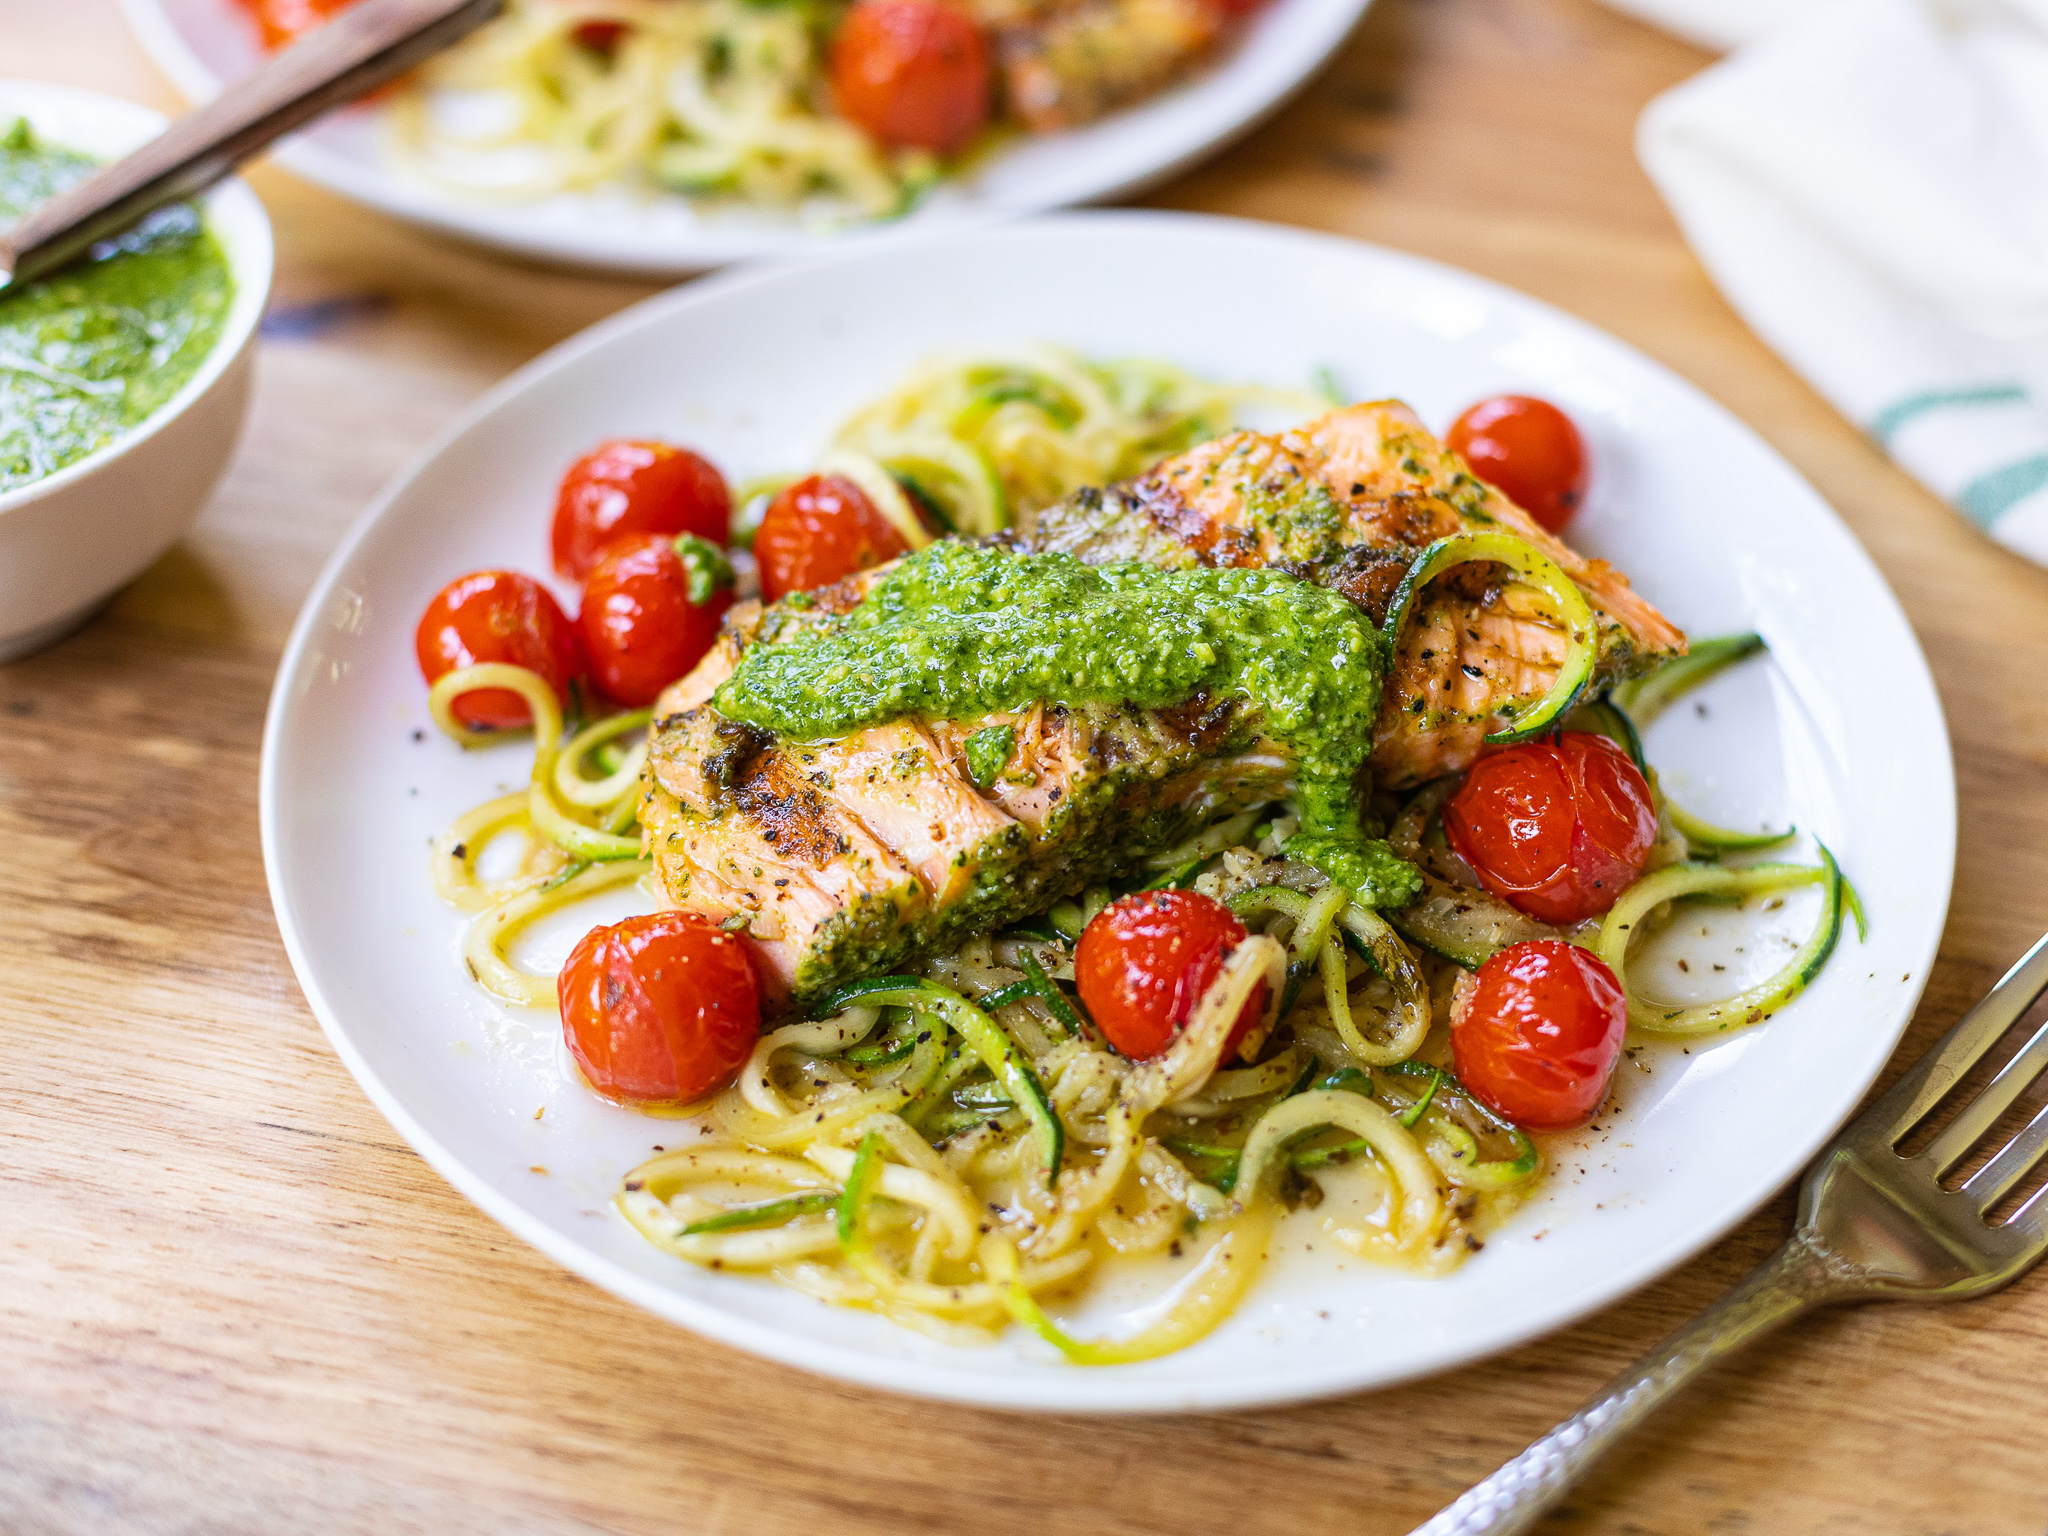 Save On Holland House Organic Wine Vinegar – Perfect For My Spinach Pesto Grilled Salmon Recipe